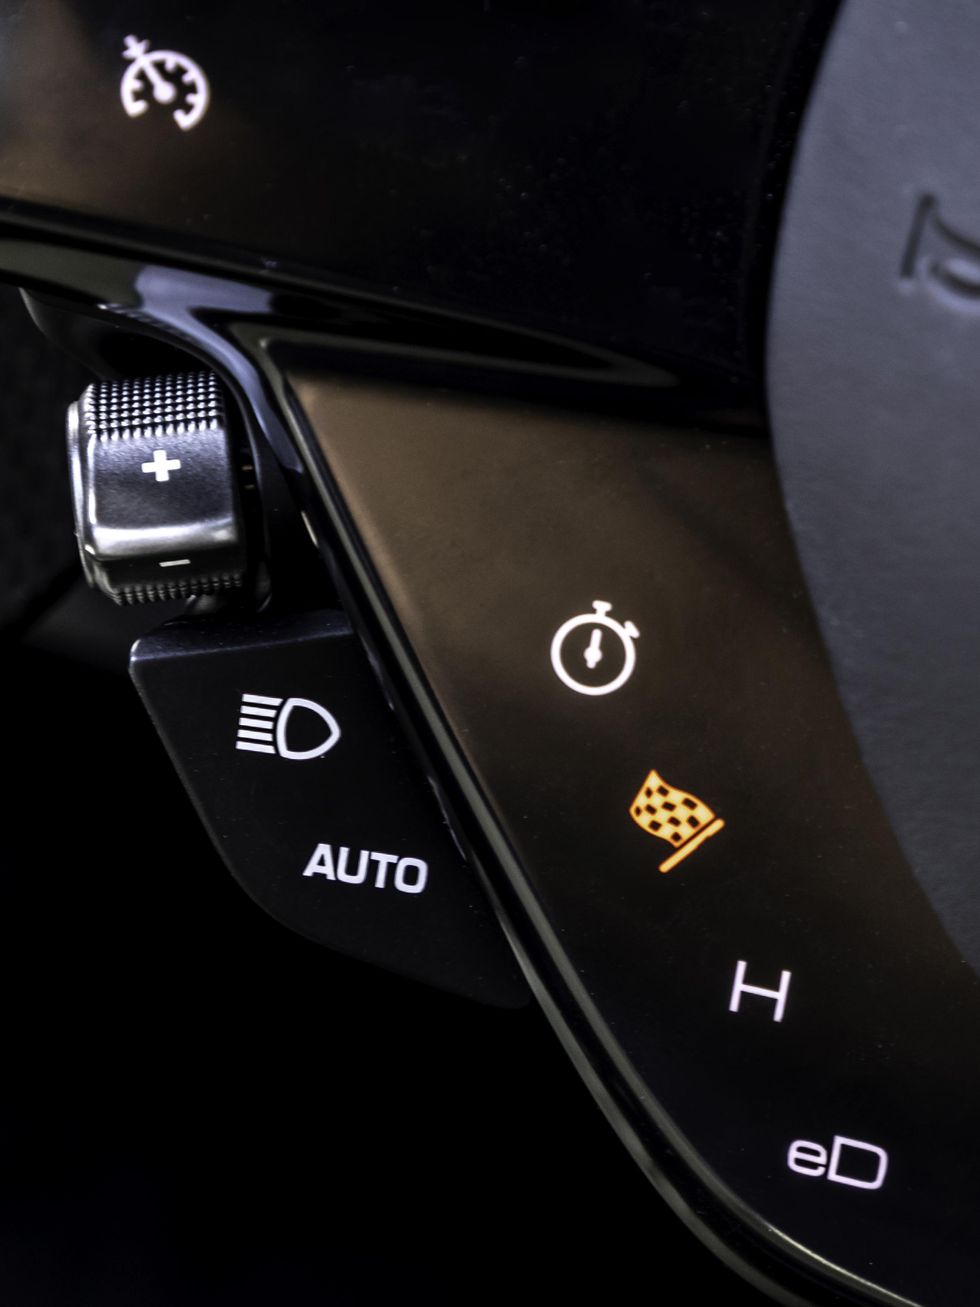 The black inner ring of the steering wheel contains four icons\u2014a white clock face, a yellow checkered flag, a white letter \u201cH,\u201d and the white letters \u201ceD.\u201d 